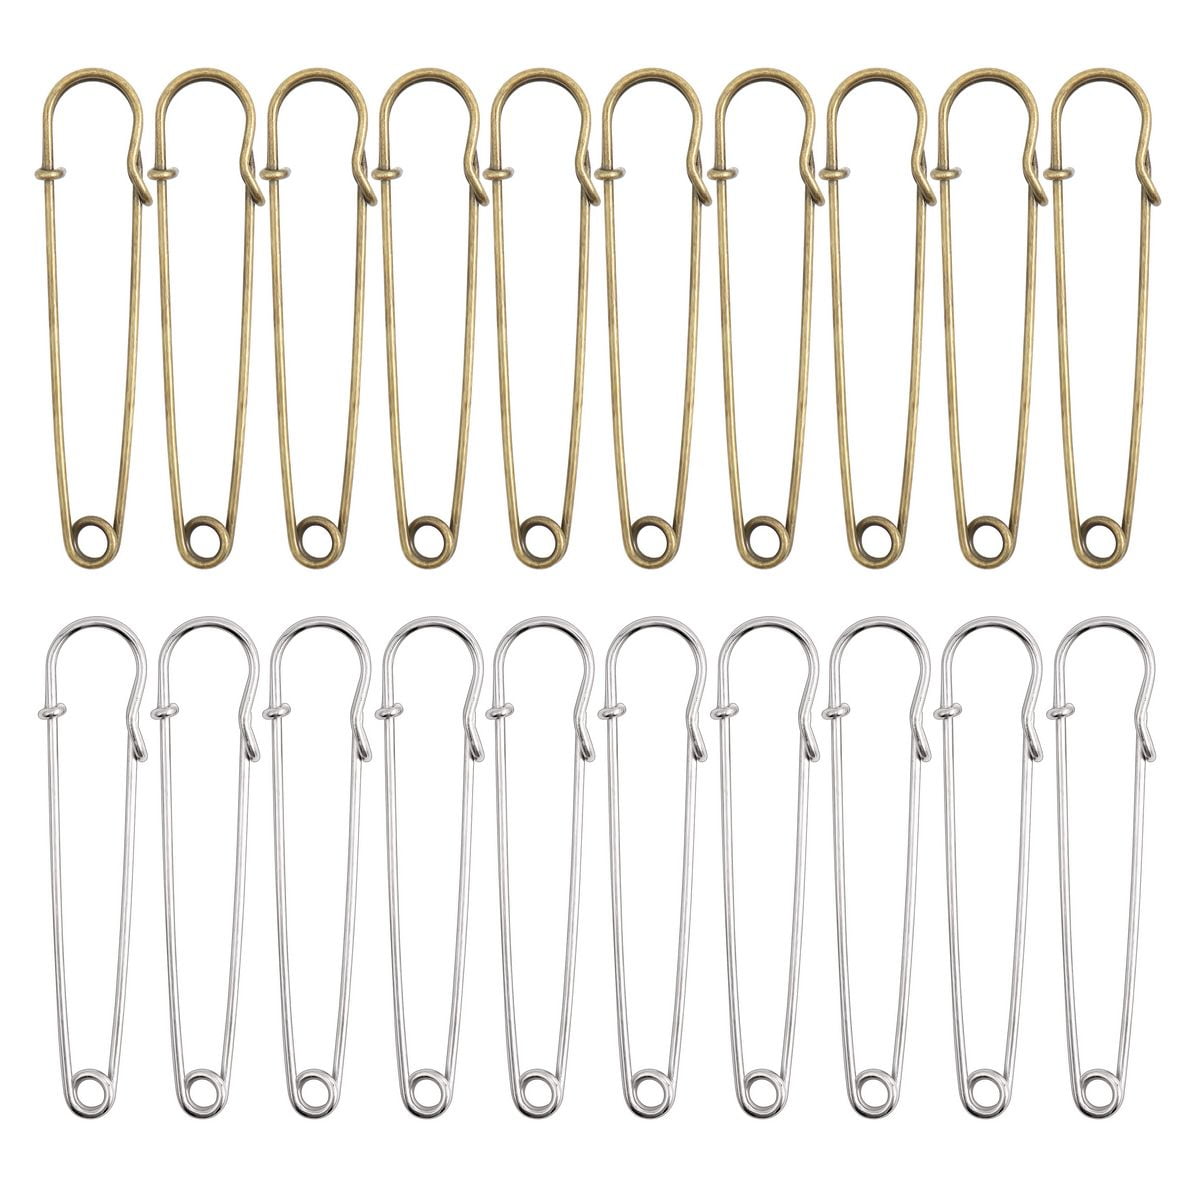 Deago 30 Pcs 3 Inch Safety Pins Large Heavy Duty Stainless Steel Safety ...